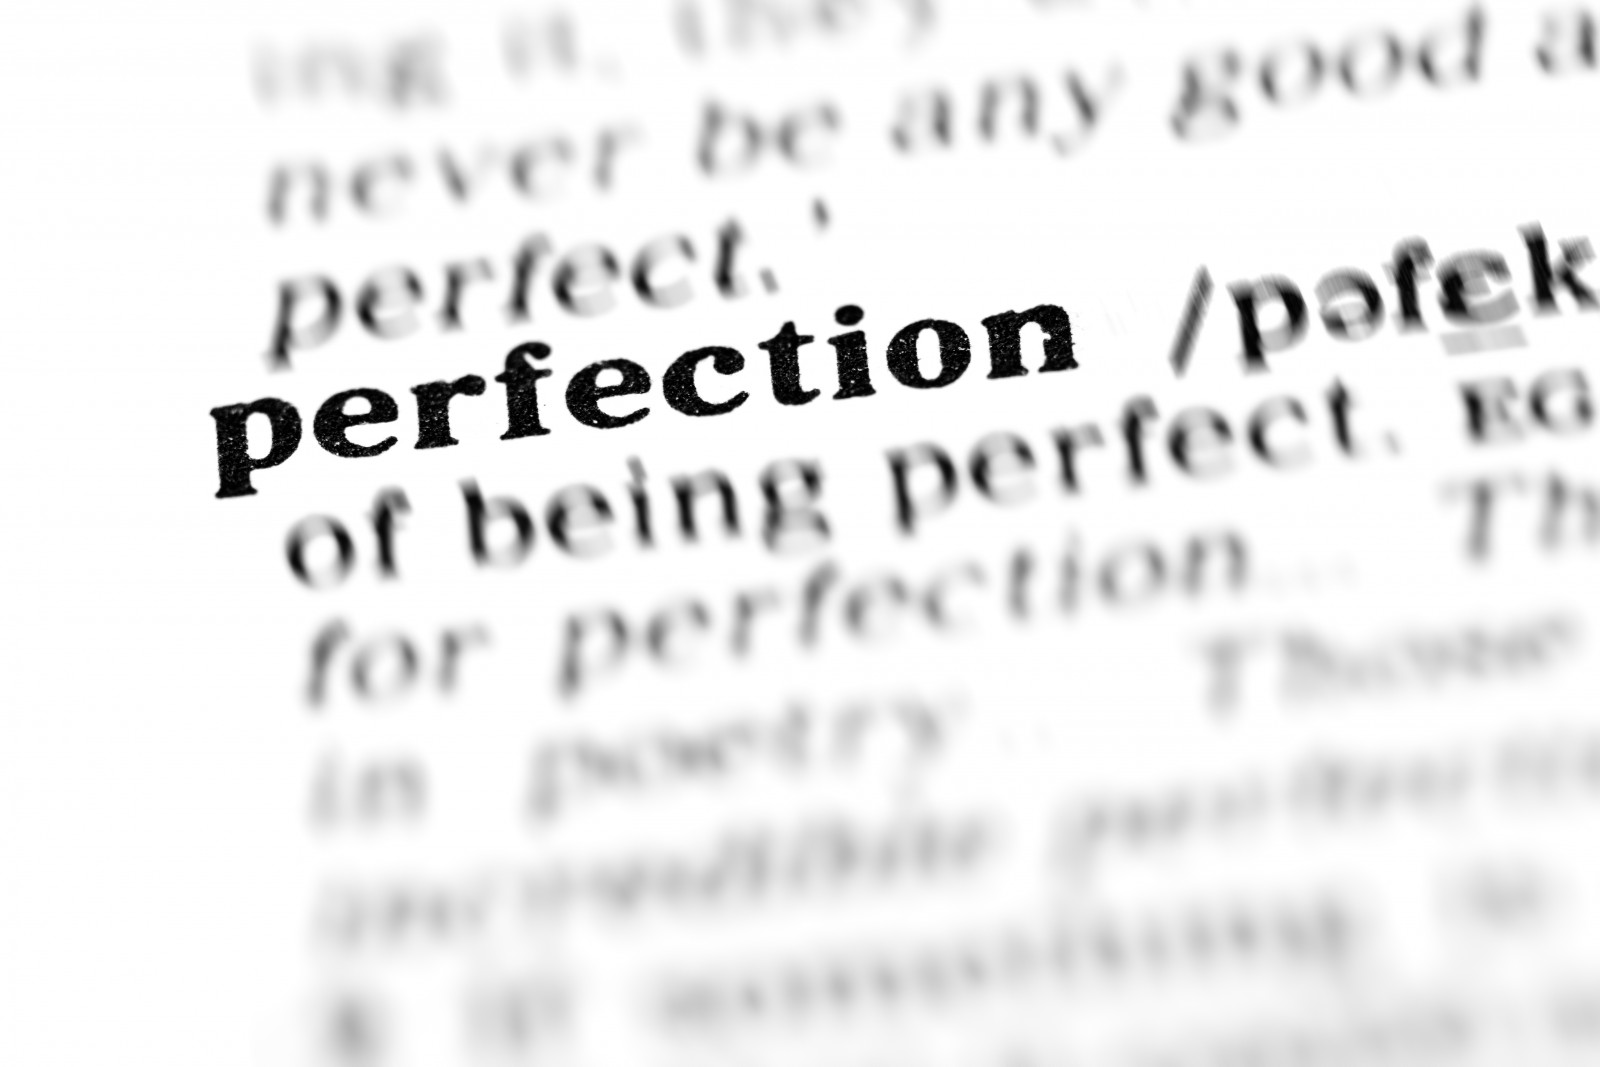 perfection (the dictionary project, macro shots, shallow D.O.F.)